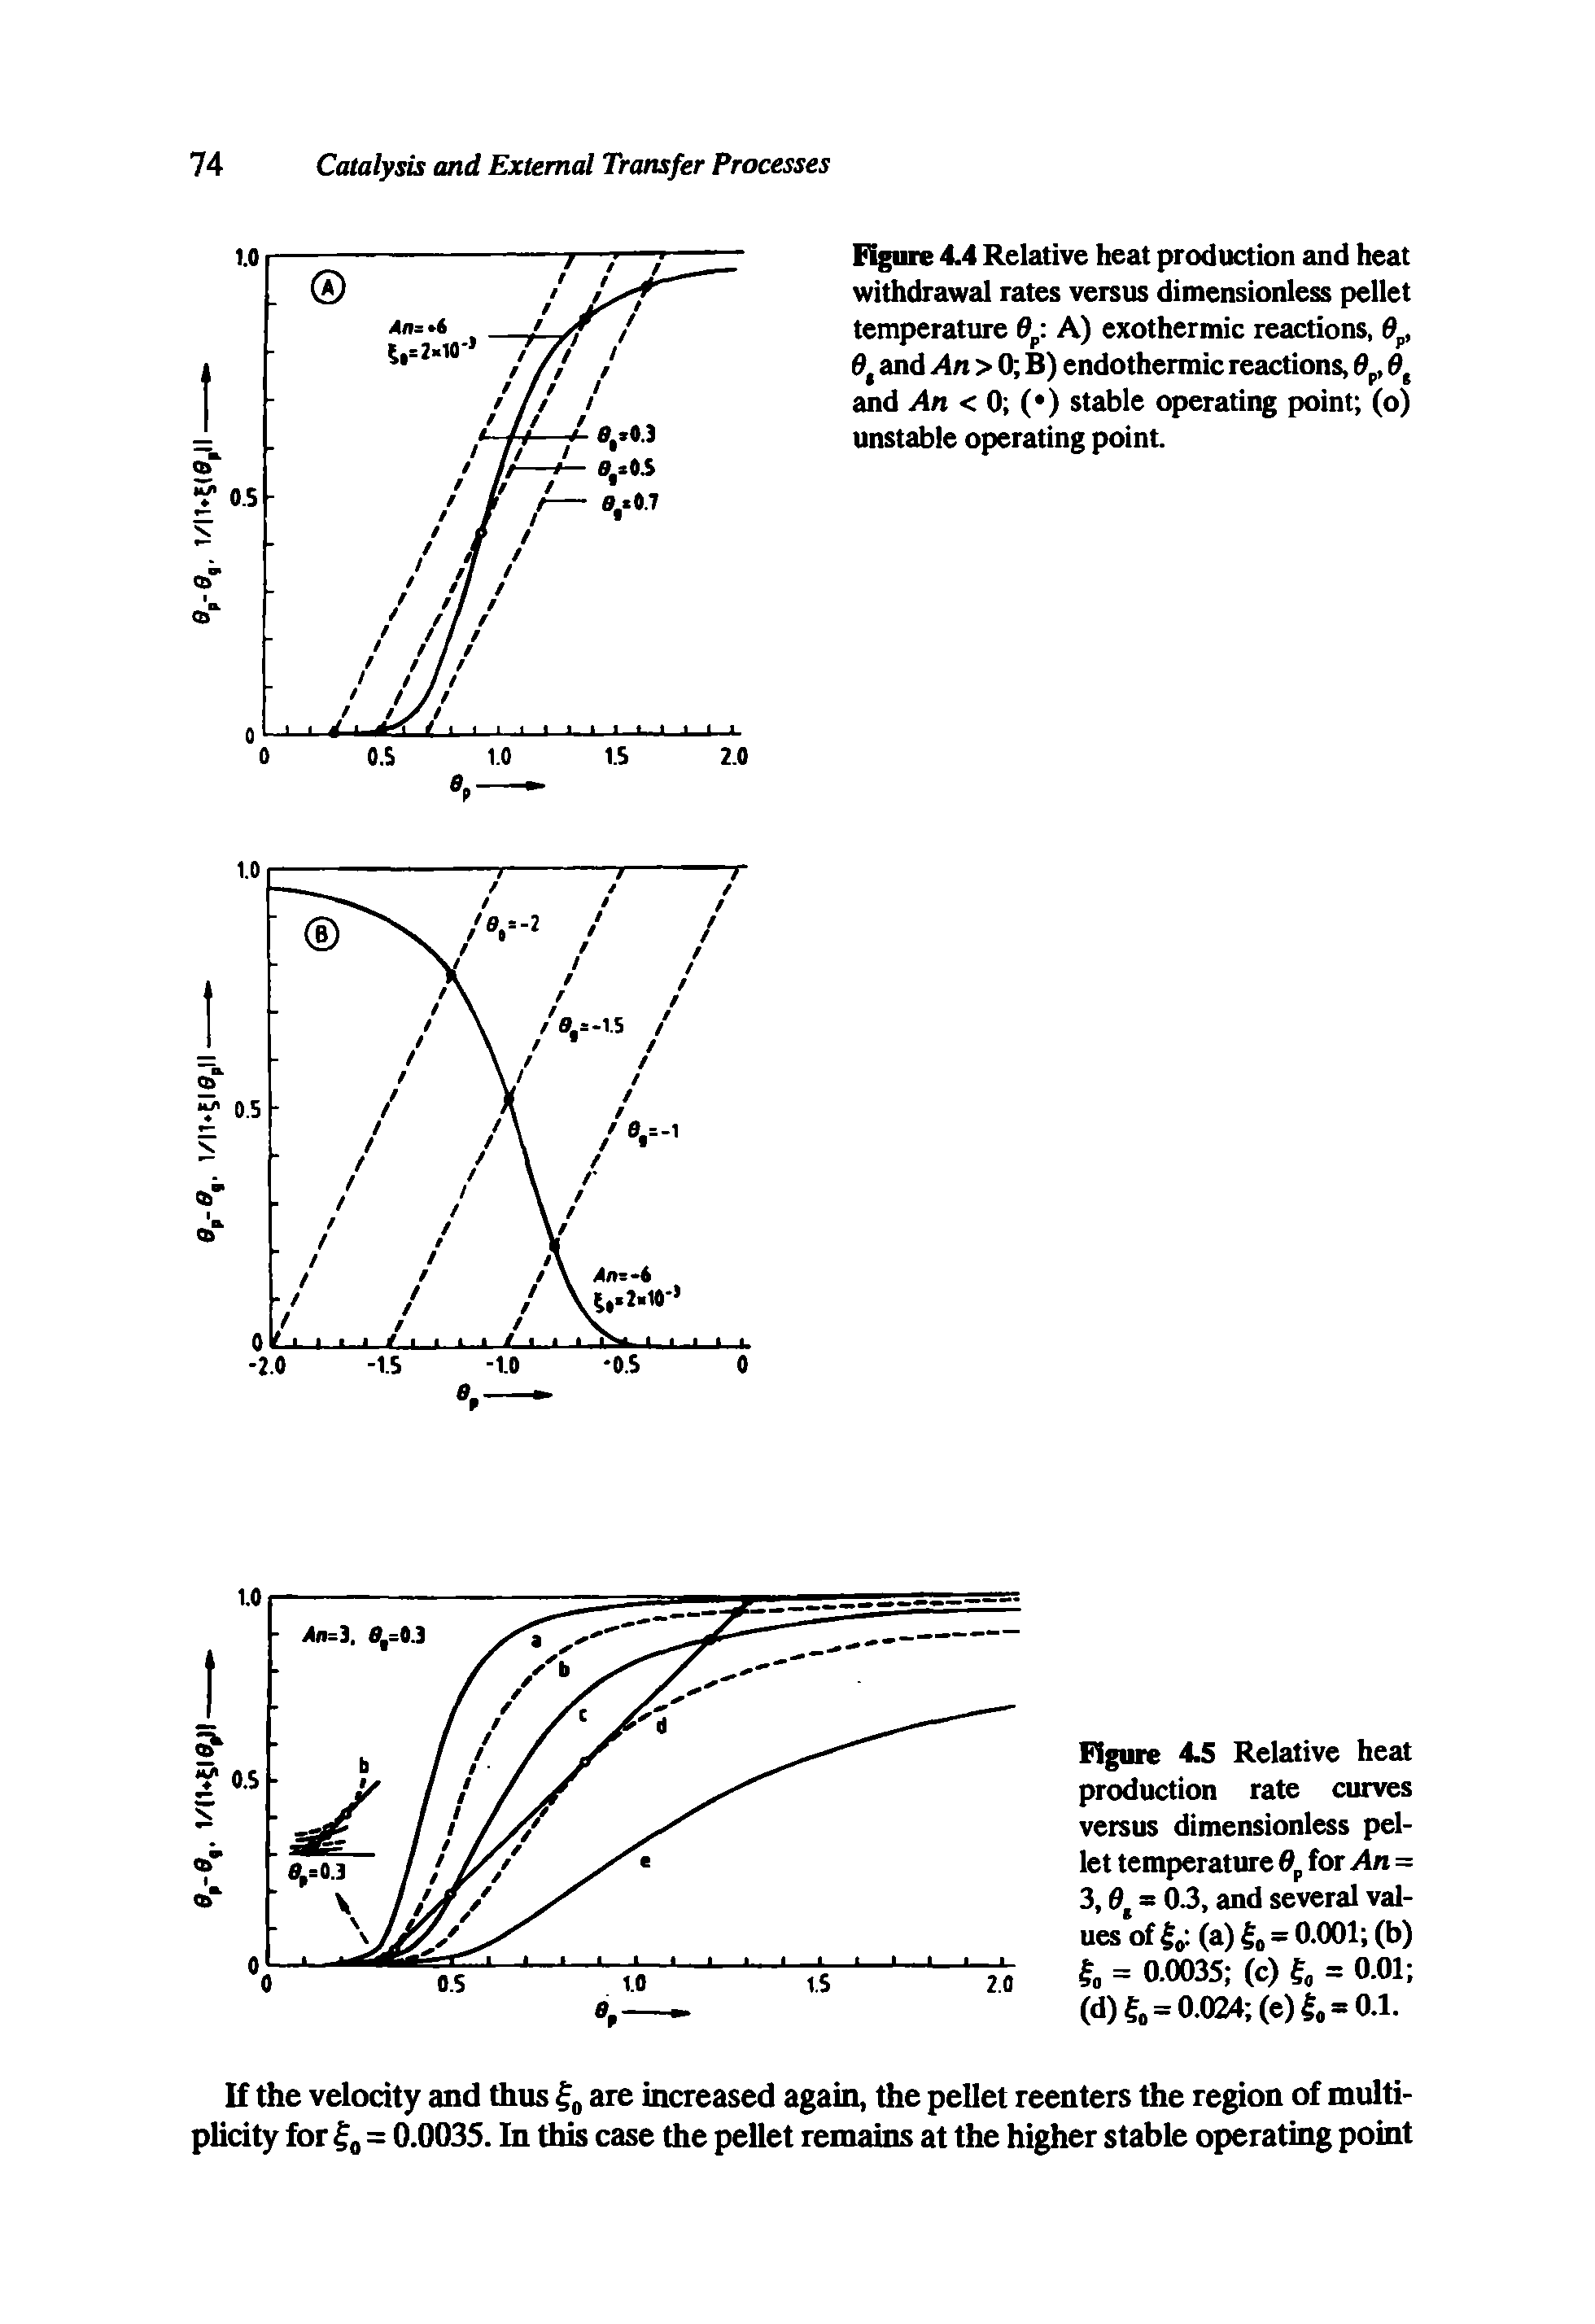 Figure 4.4 Relative heat production and heat withdrawal rates versus dimensionless pellet temperature 0p A) exothermic reactions, 0p, 0t and An > 0 B) endothermic reactions, 0p, 0t and An < 0 ( ) stable operating point (o) unstable operating point.